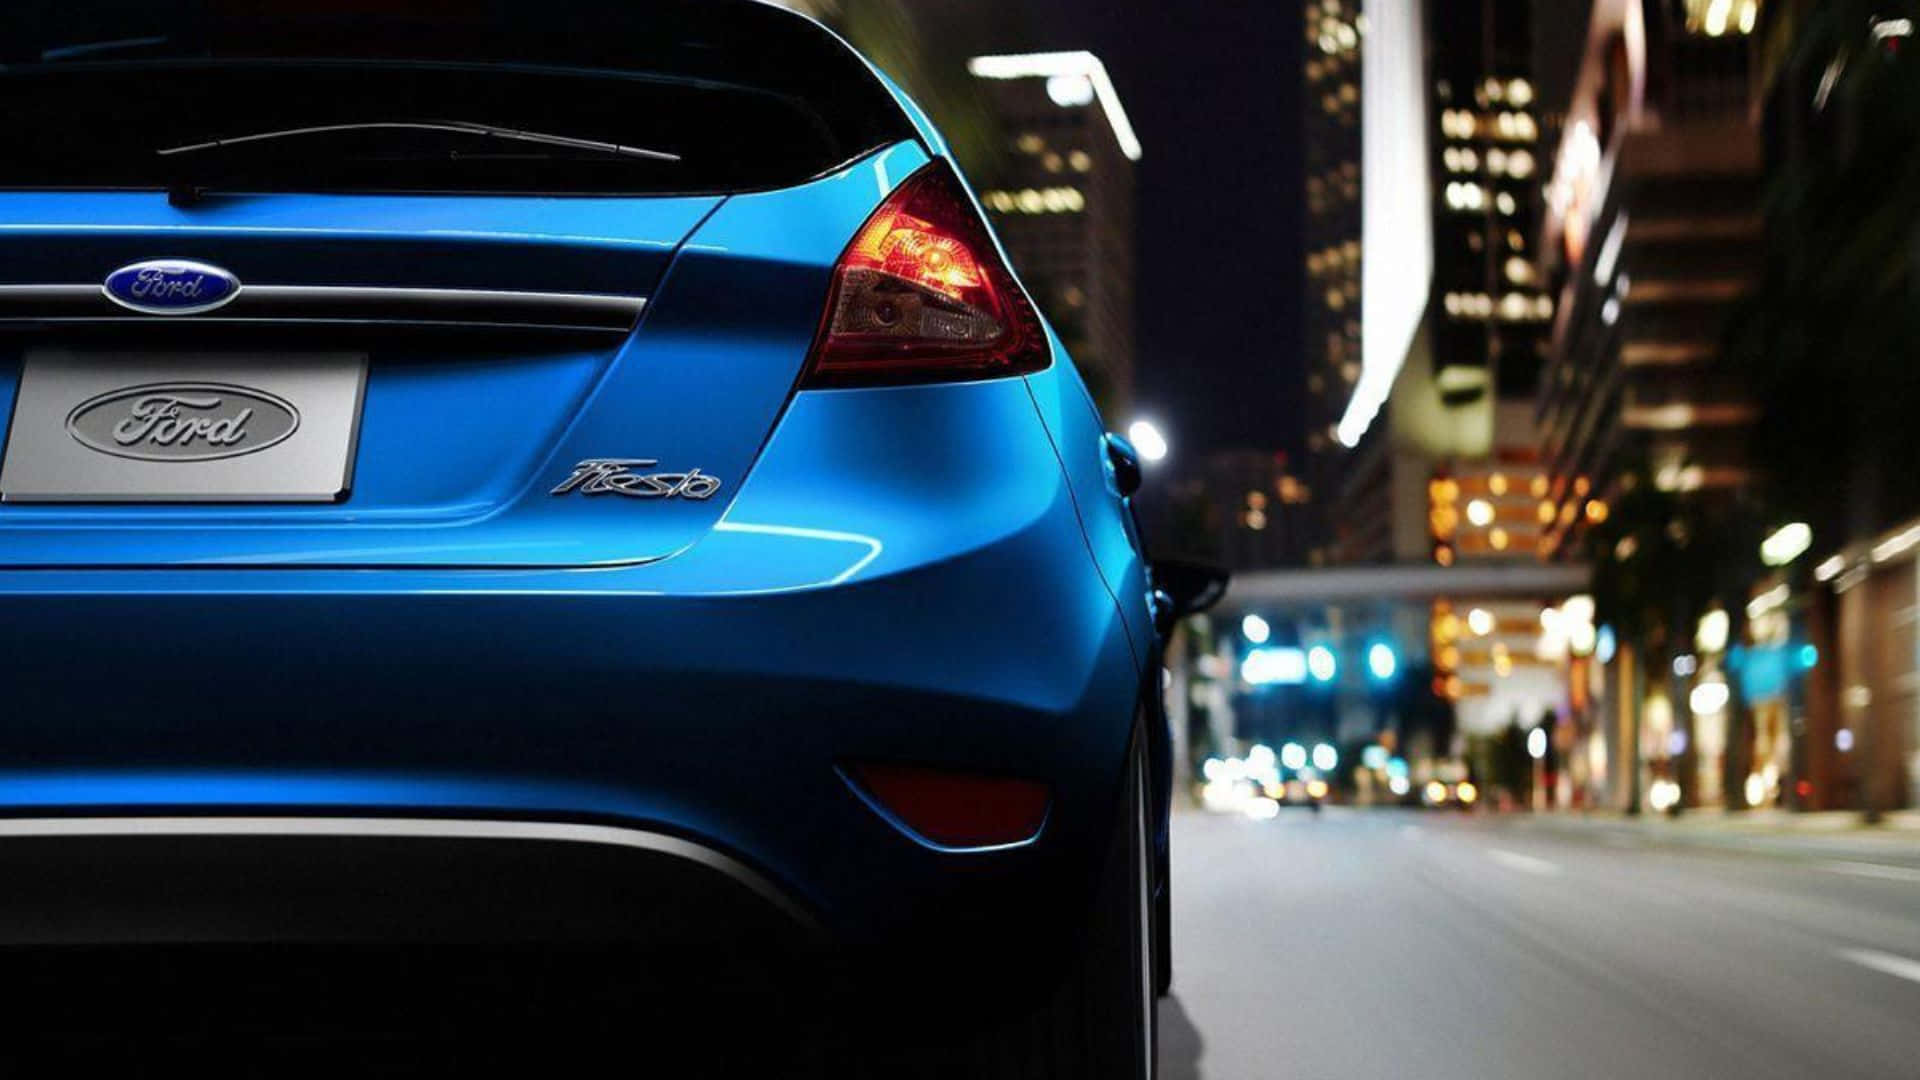 The Sleek And Stylish Ford Fiesta On A Road Adventure Wallpaper